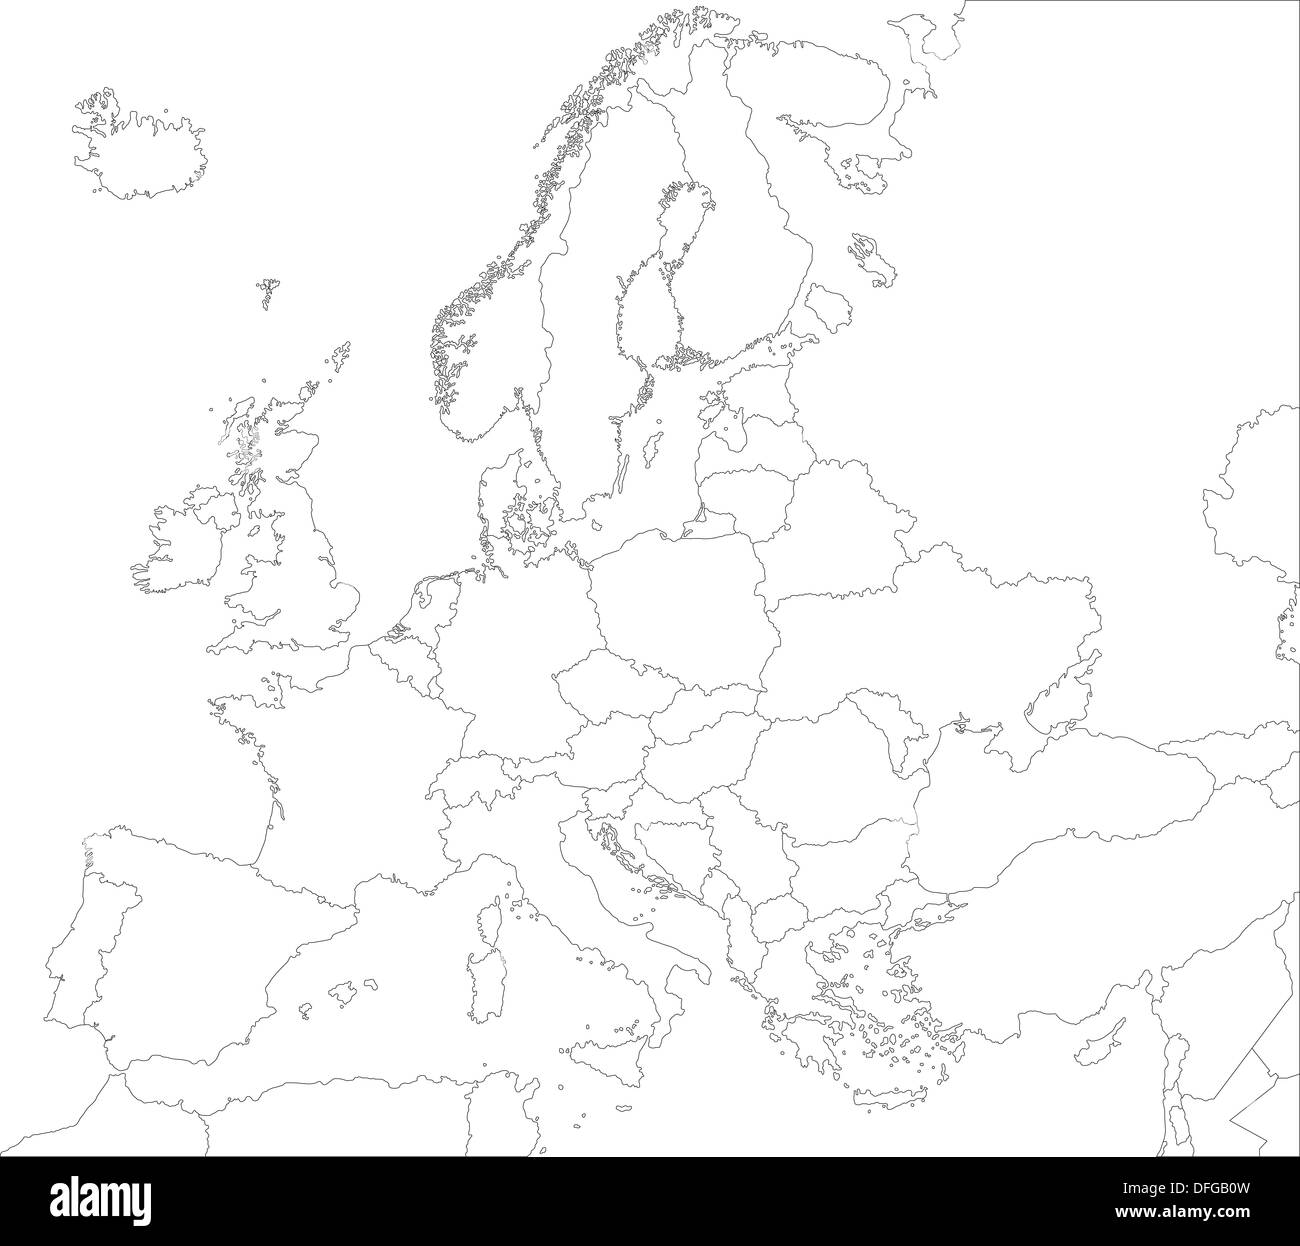 Outline Europe map Stock Photo